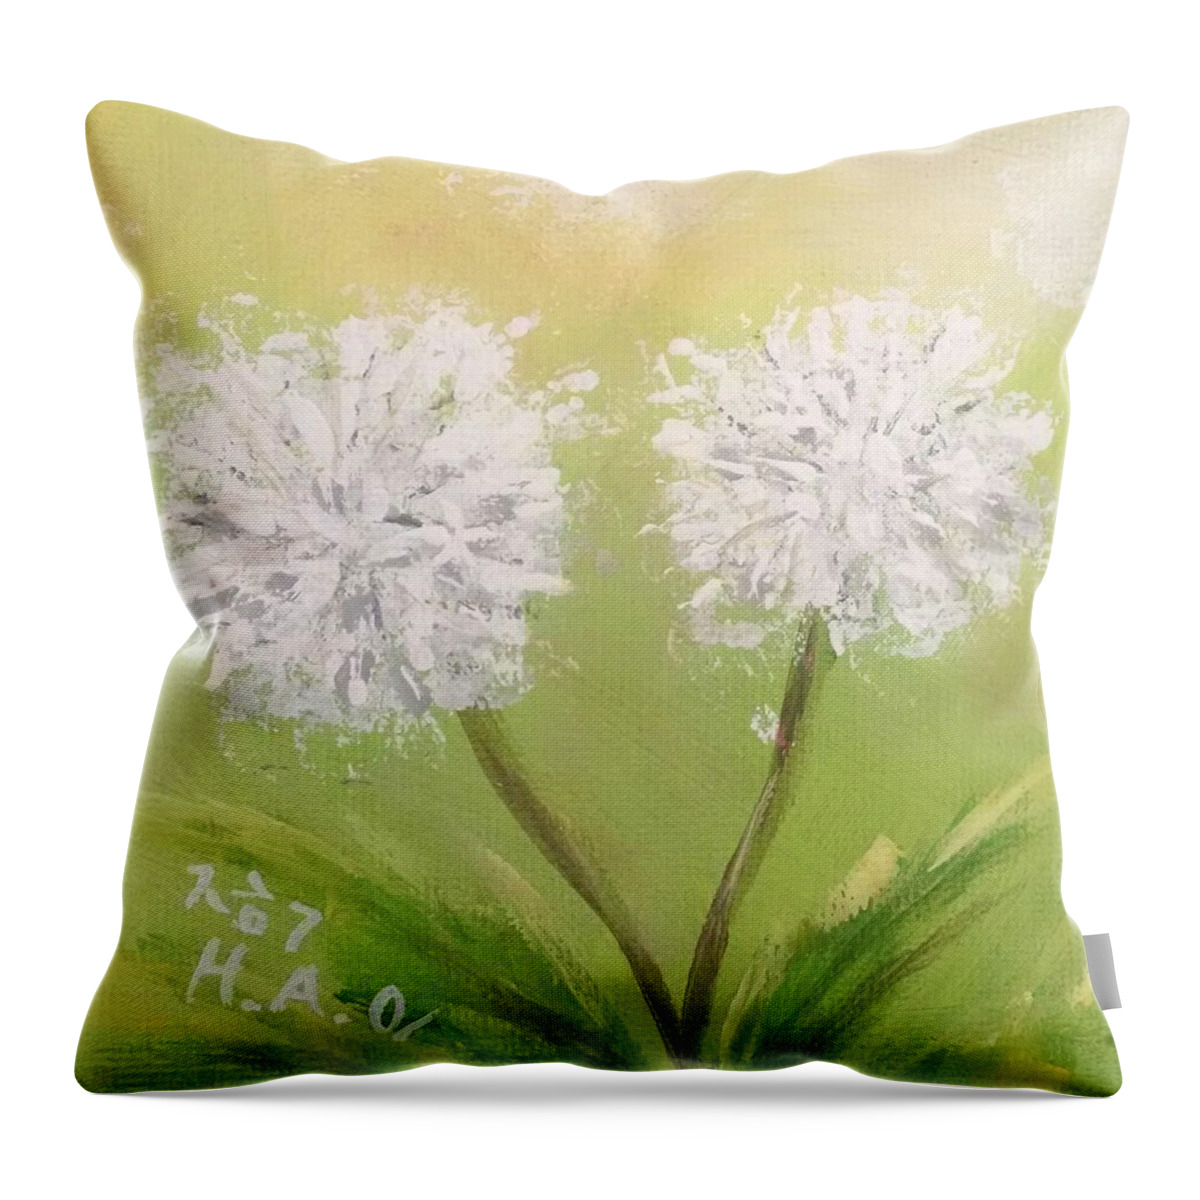 Dandelion Throw Pillow featuring the painting Make Double Wishes by Helian Cornwell